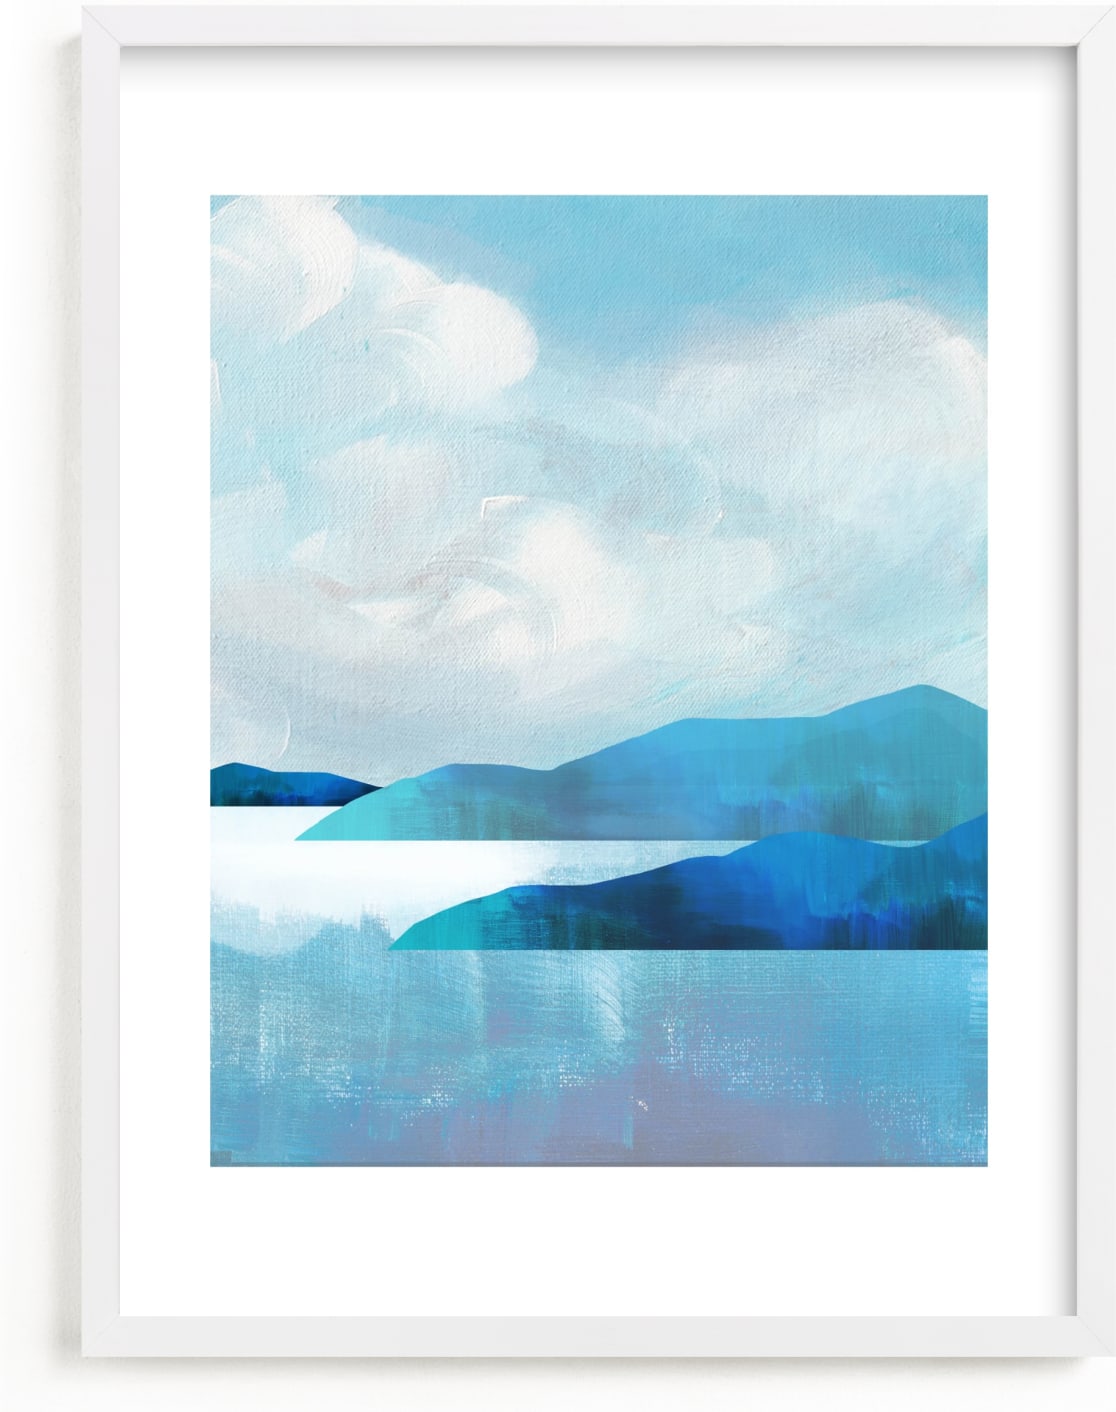 This is a blue kids wall art by AlisonJerry called beyond blue ridge.